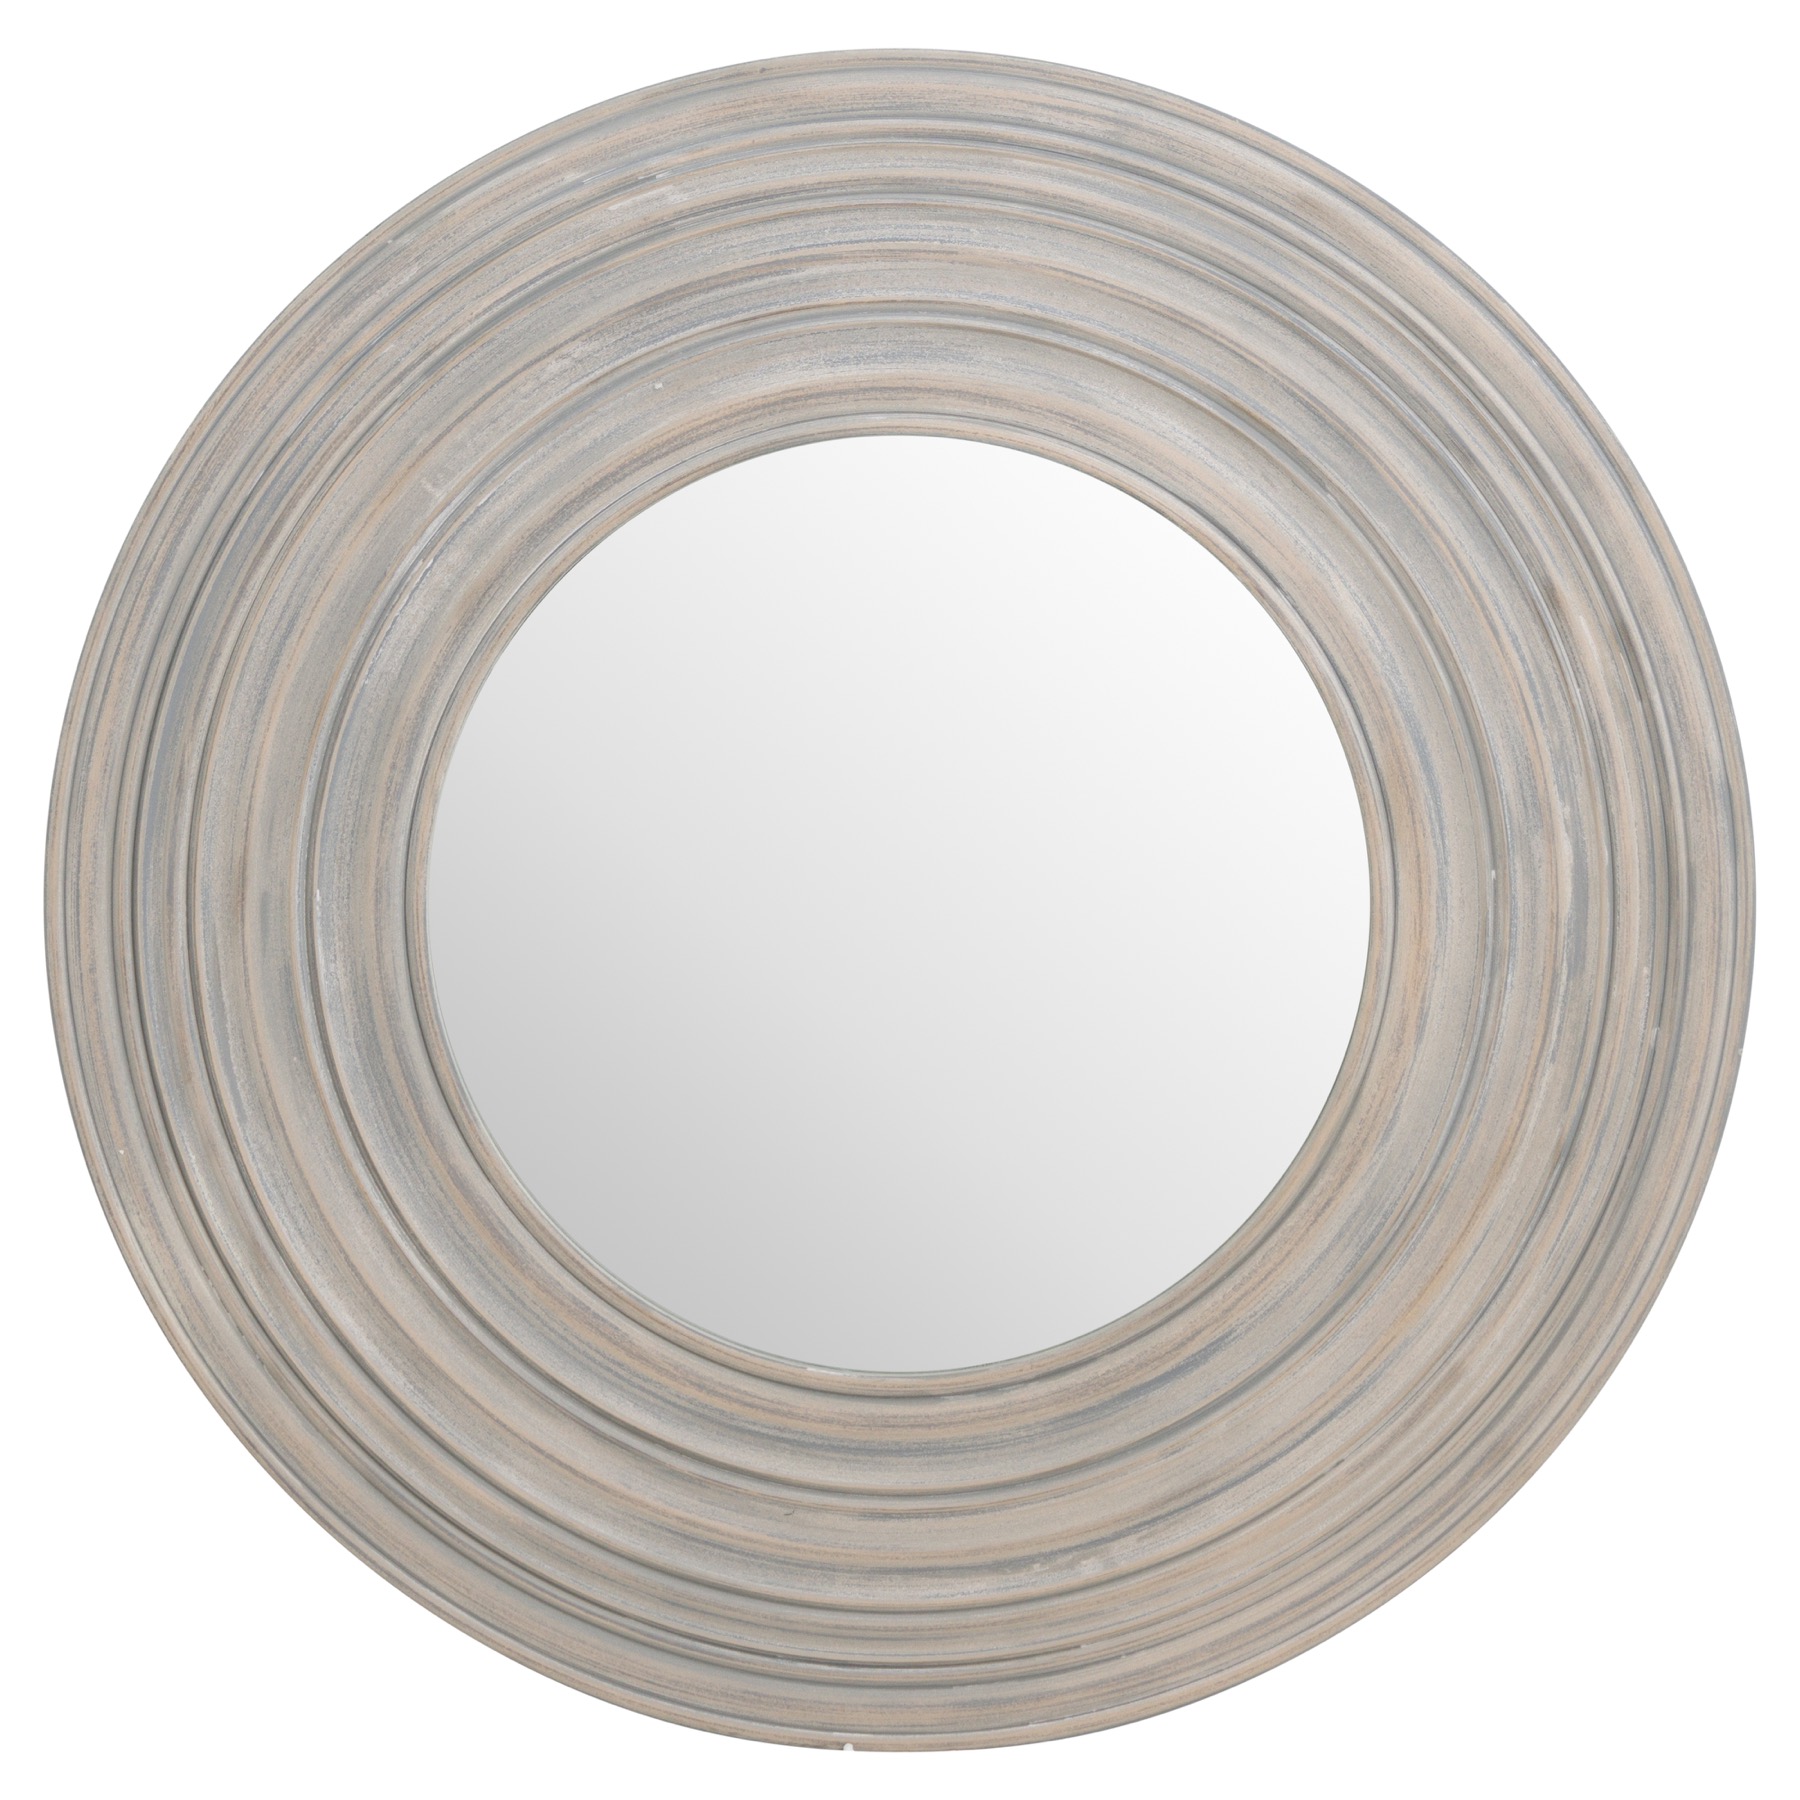 Grey Painted Round Ribbed Mirror - Image 1